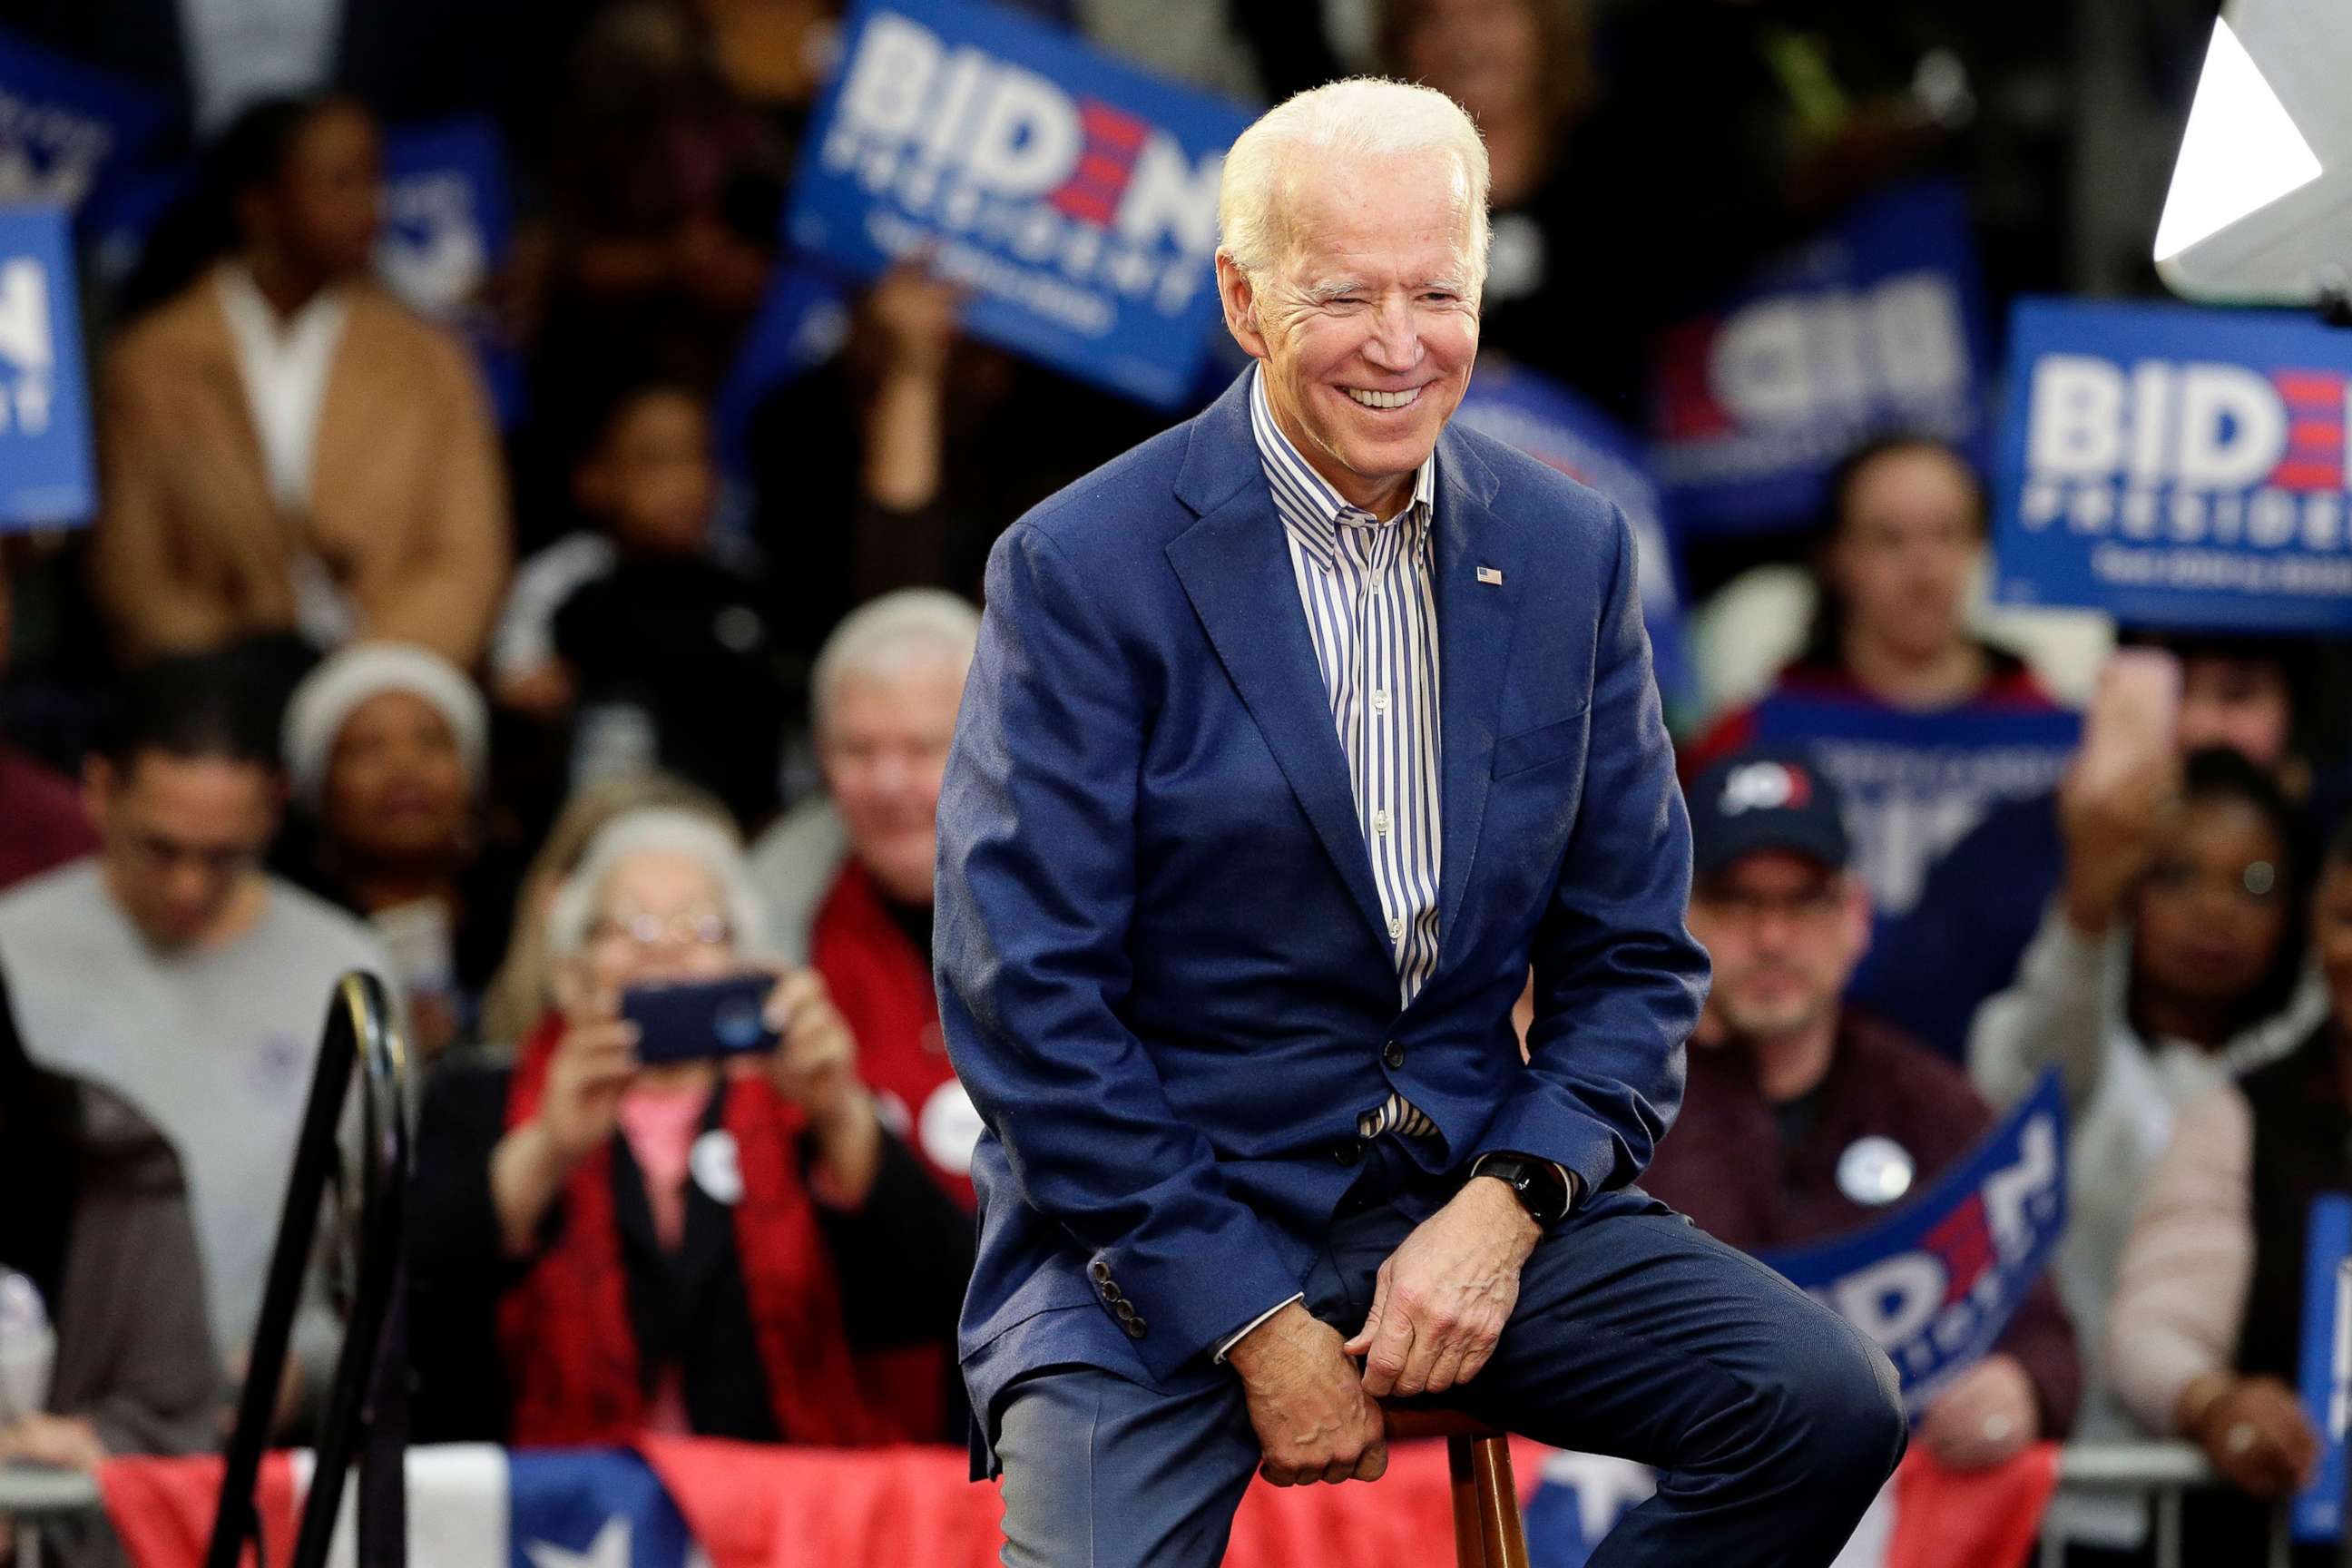 PHOTO: Democratic presidential candidate former Vice President Joe Biden smiles while being introduced at a campaign event at Saint Augustine's University in Raleigh, N.C., Feb. 29, 2020.